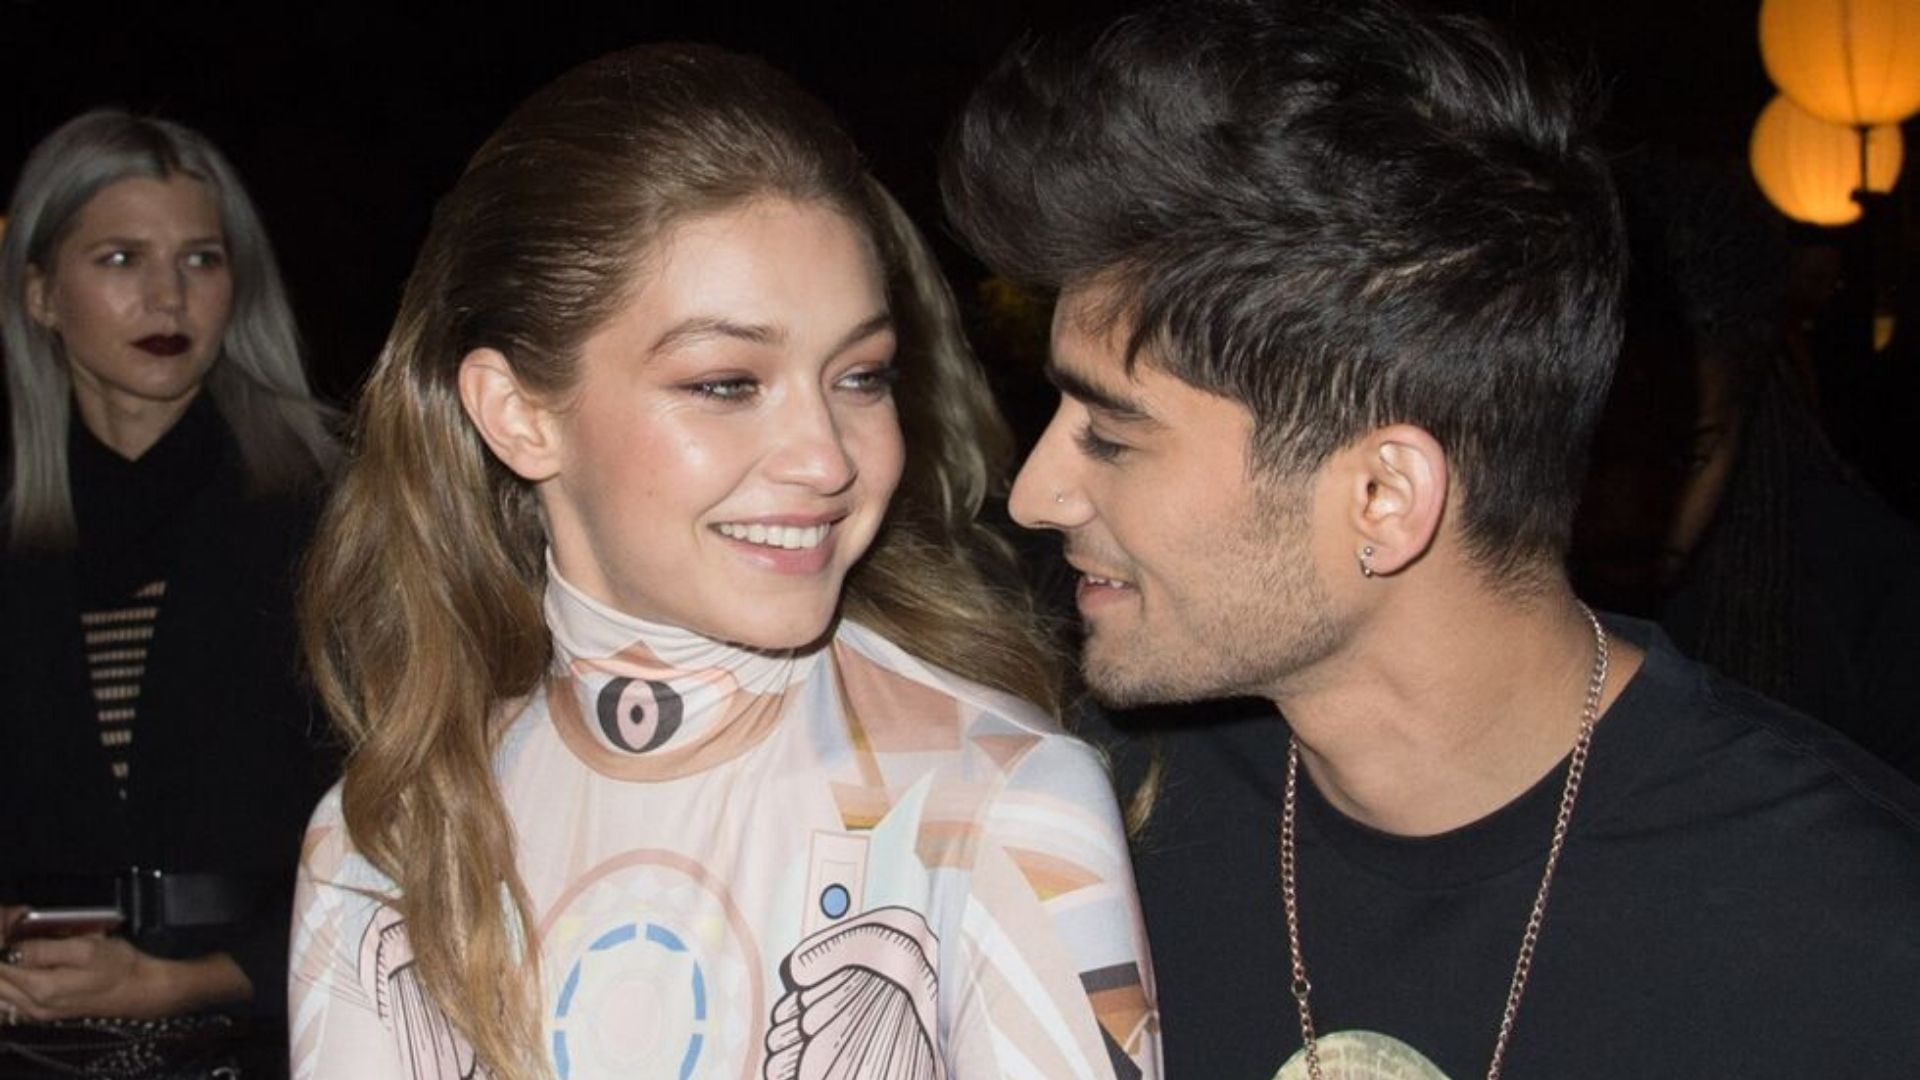 It's Official, Gigi Hadid And Zayn Malik Are Back Together